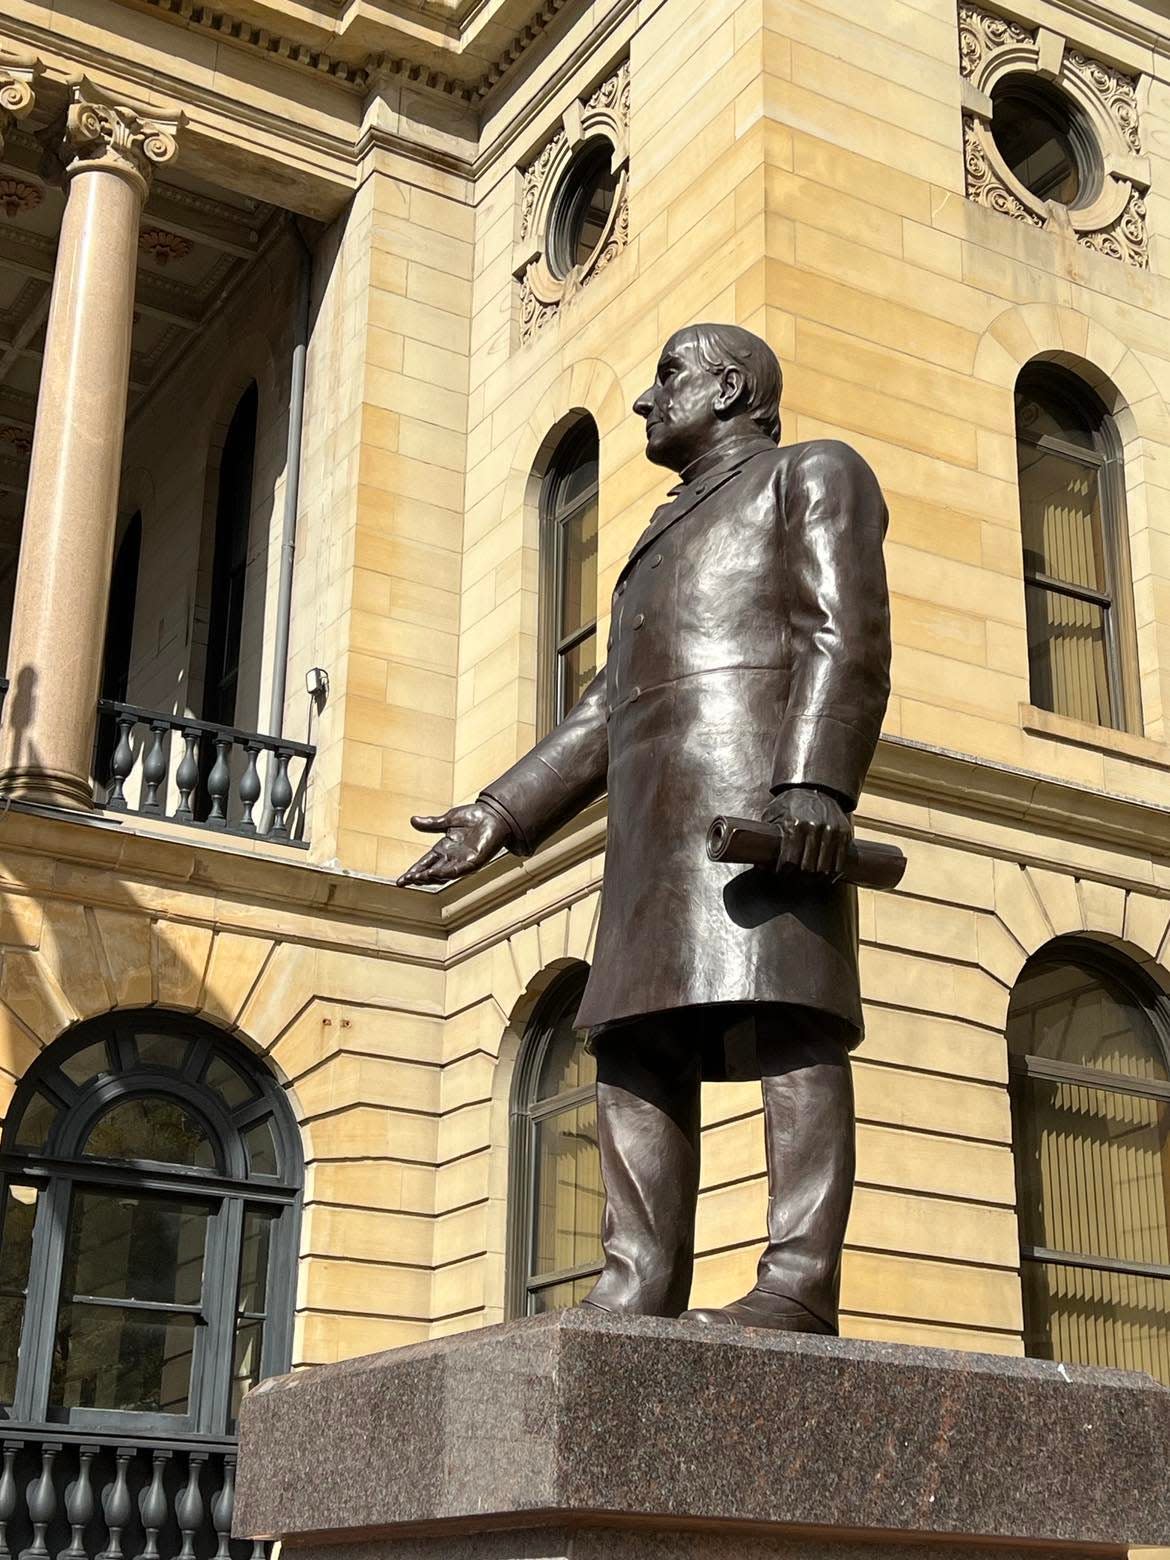 A bronze statue of President William McKinley was unveiled on Saturday in front of the Stark County Courthouse in downtown Canton. The statue was restored and relocated from Arcata, California.